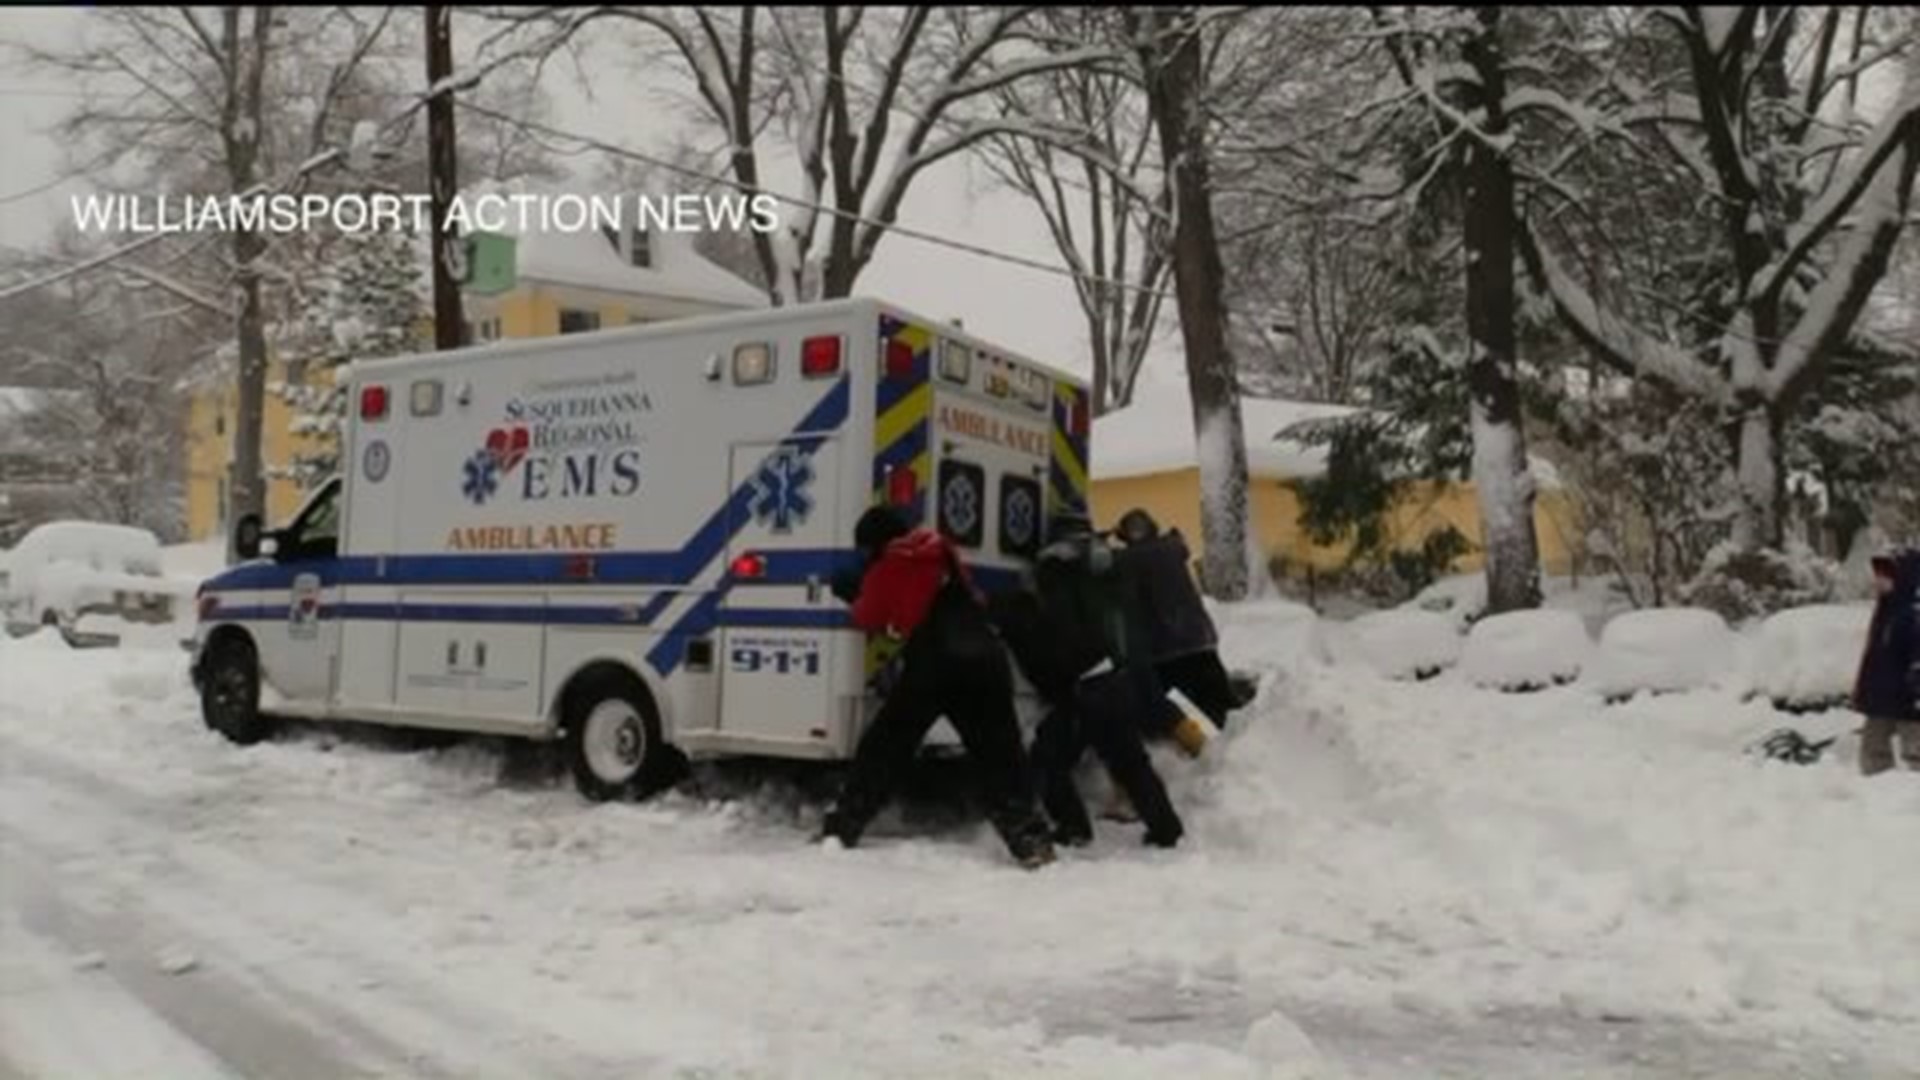 Neighbors Shovel out Ambulance Stuck in Snow